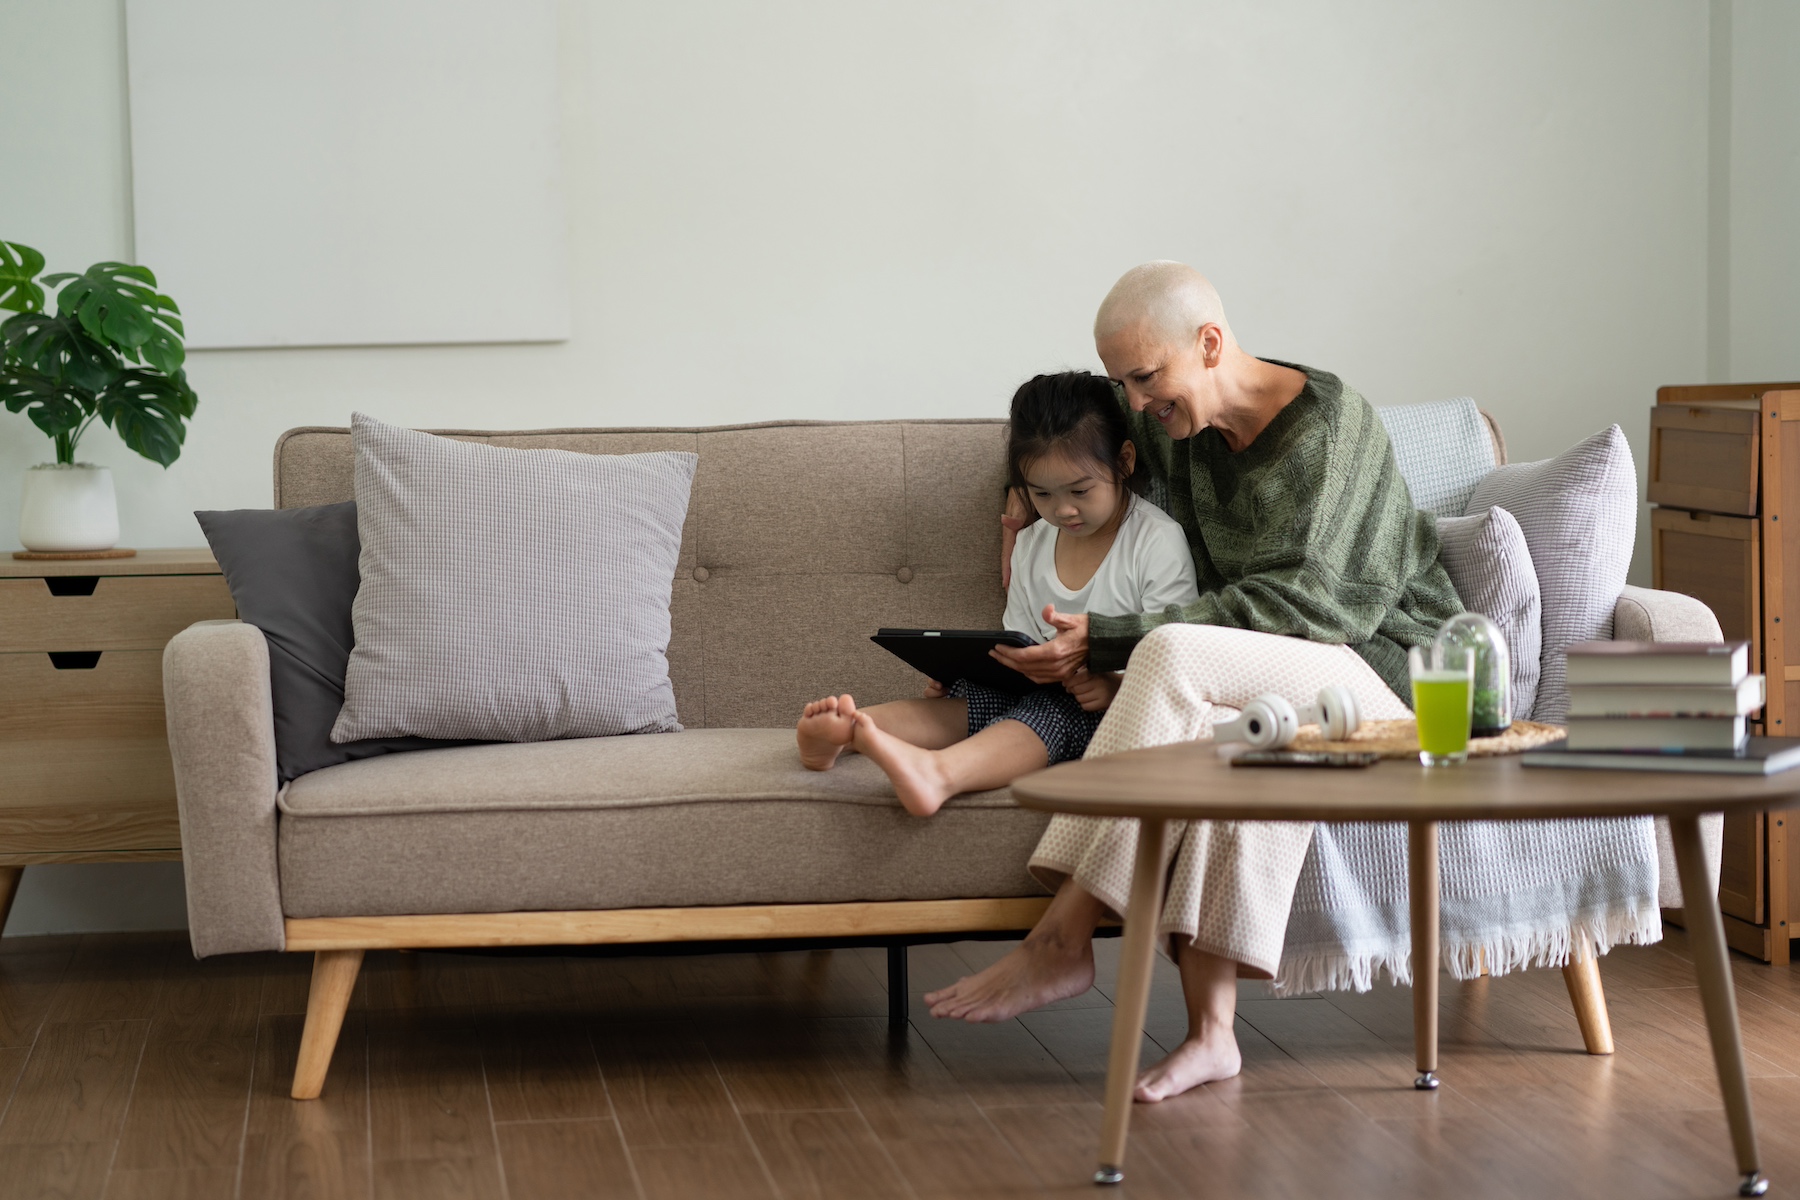 A grandmother and granddaughter sit on the sofa together looking at a tablet